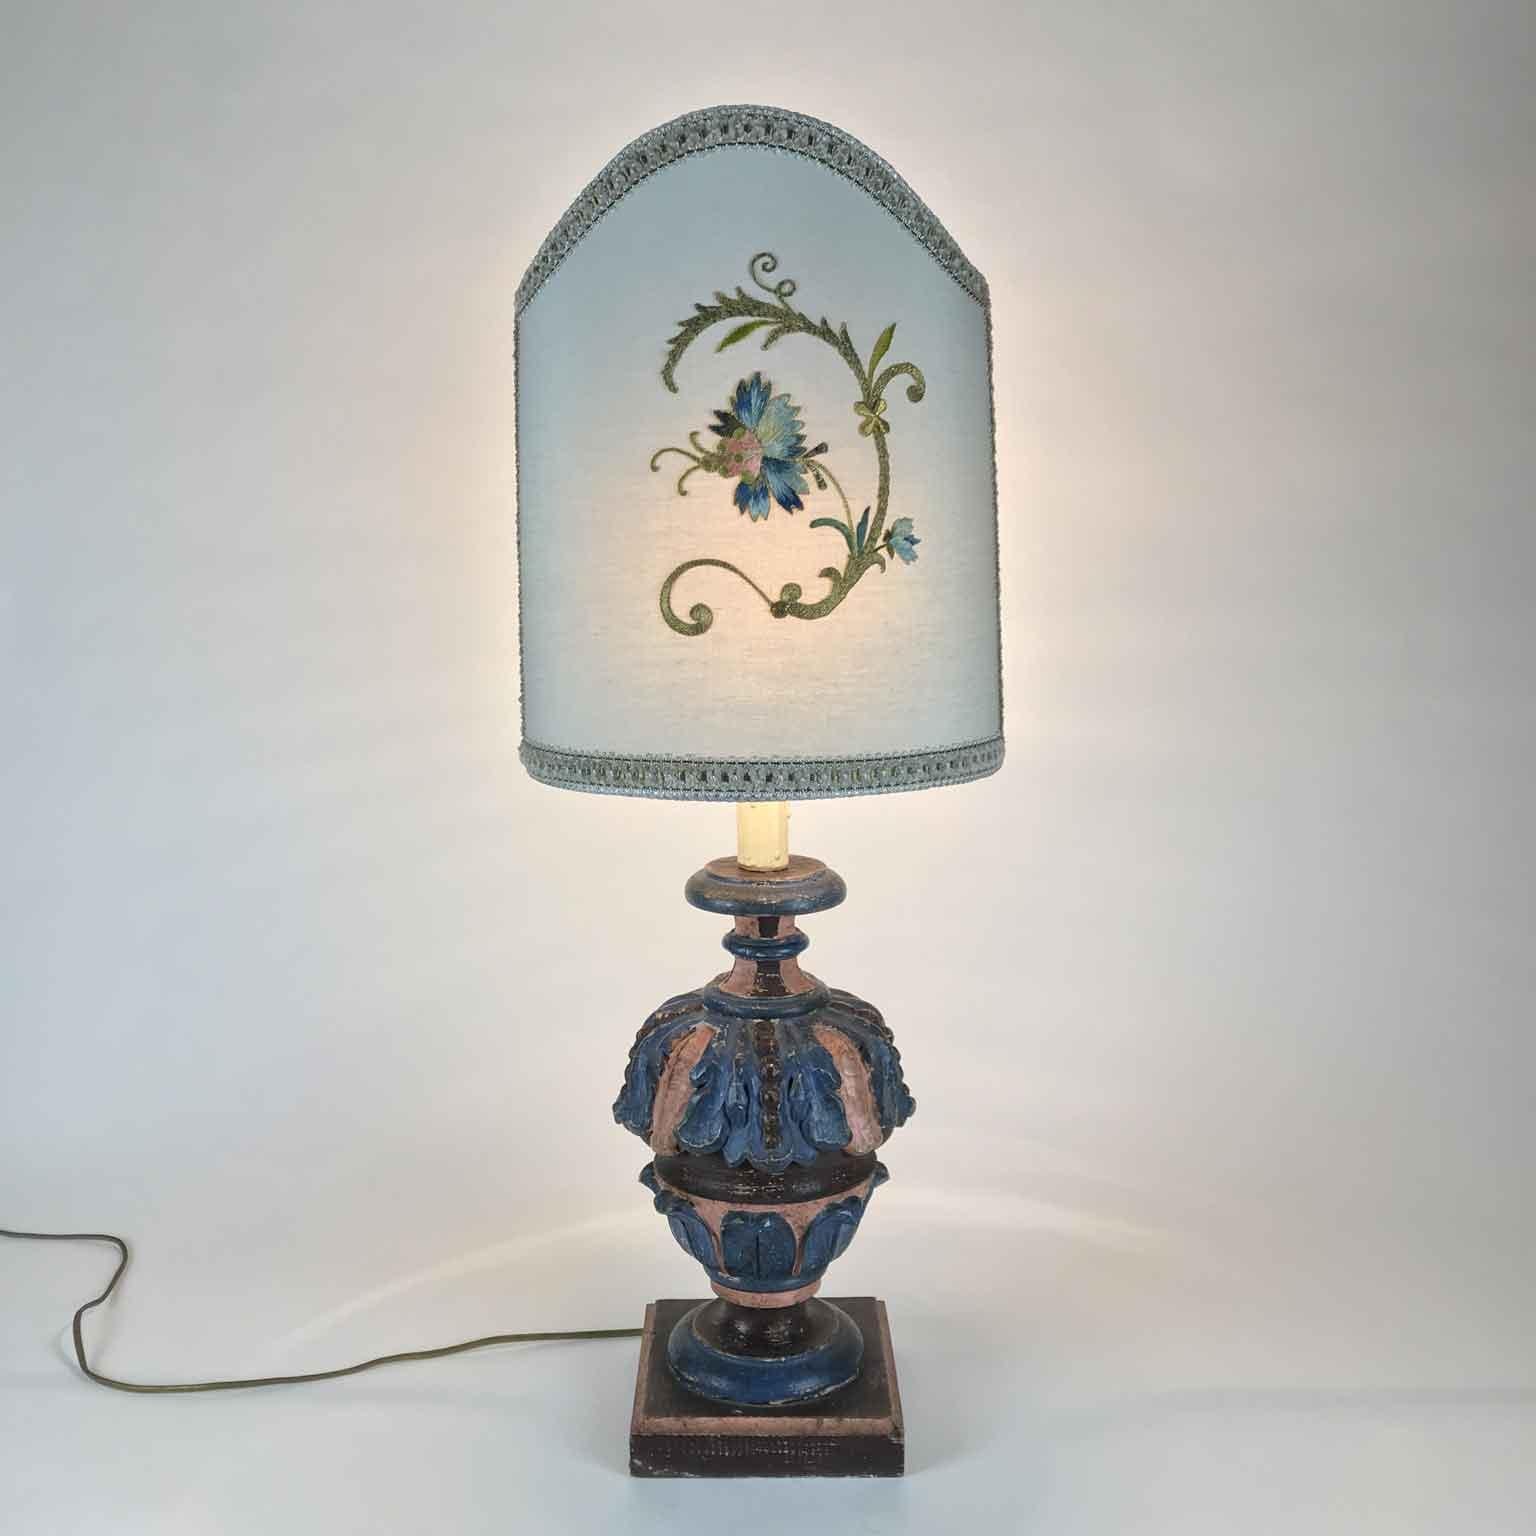 Renaissance Revival Pair of Florentine Blue Rose Hand-Carved Table Lamps by Bartolozzi Maioli, 1970 For Sale